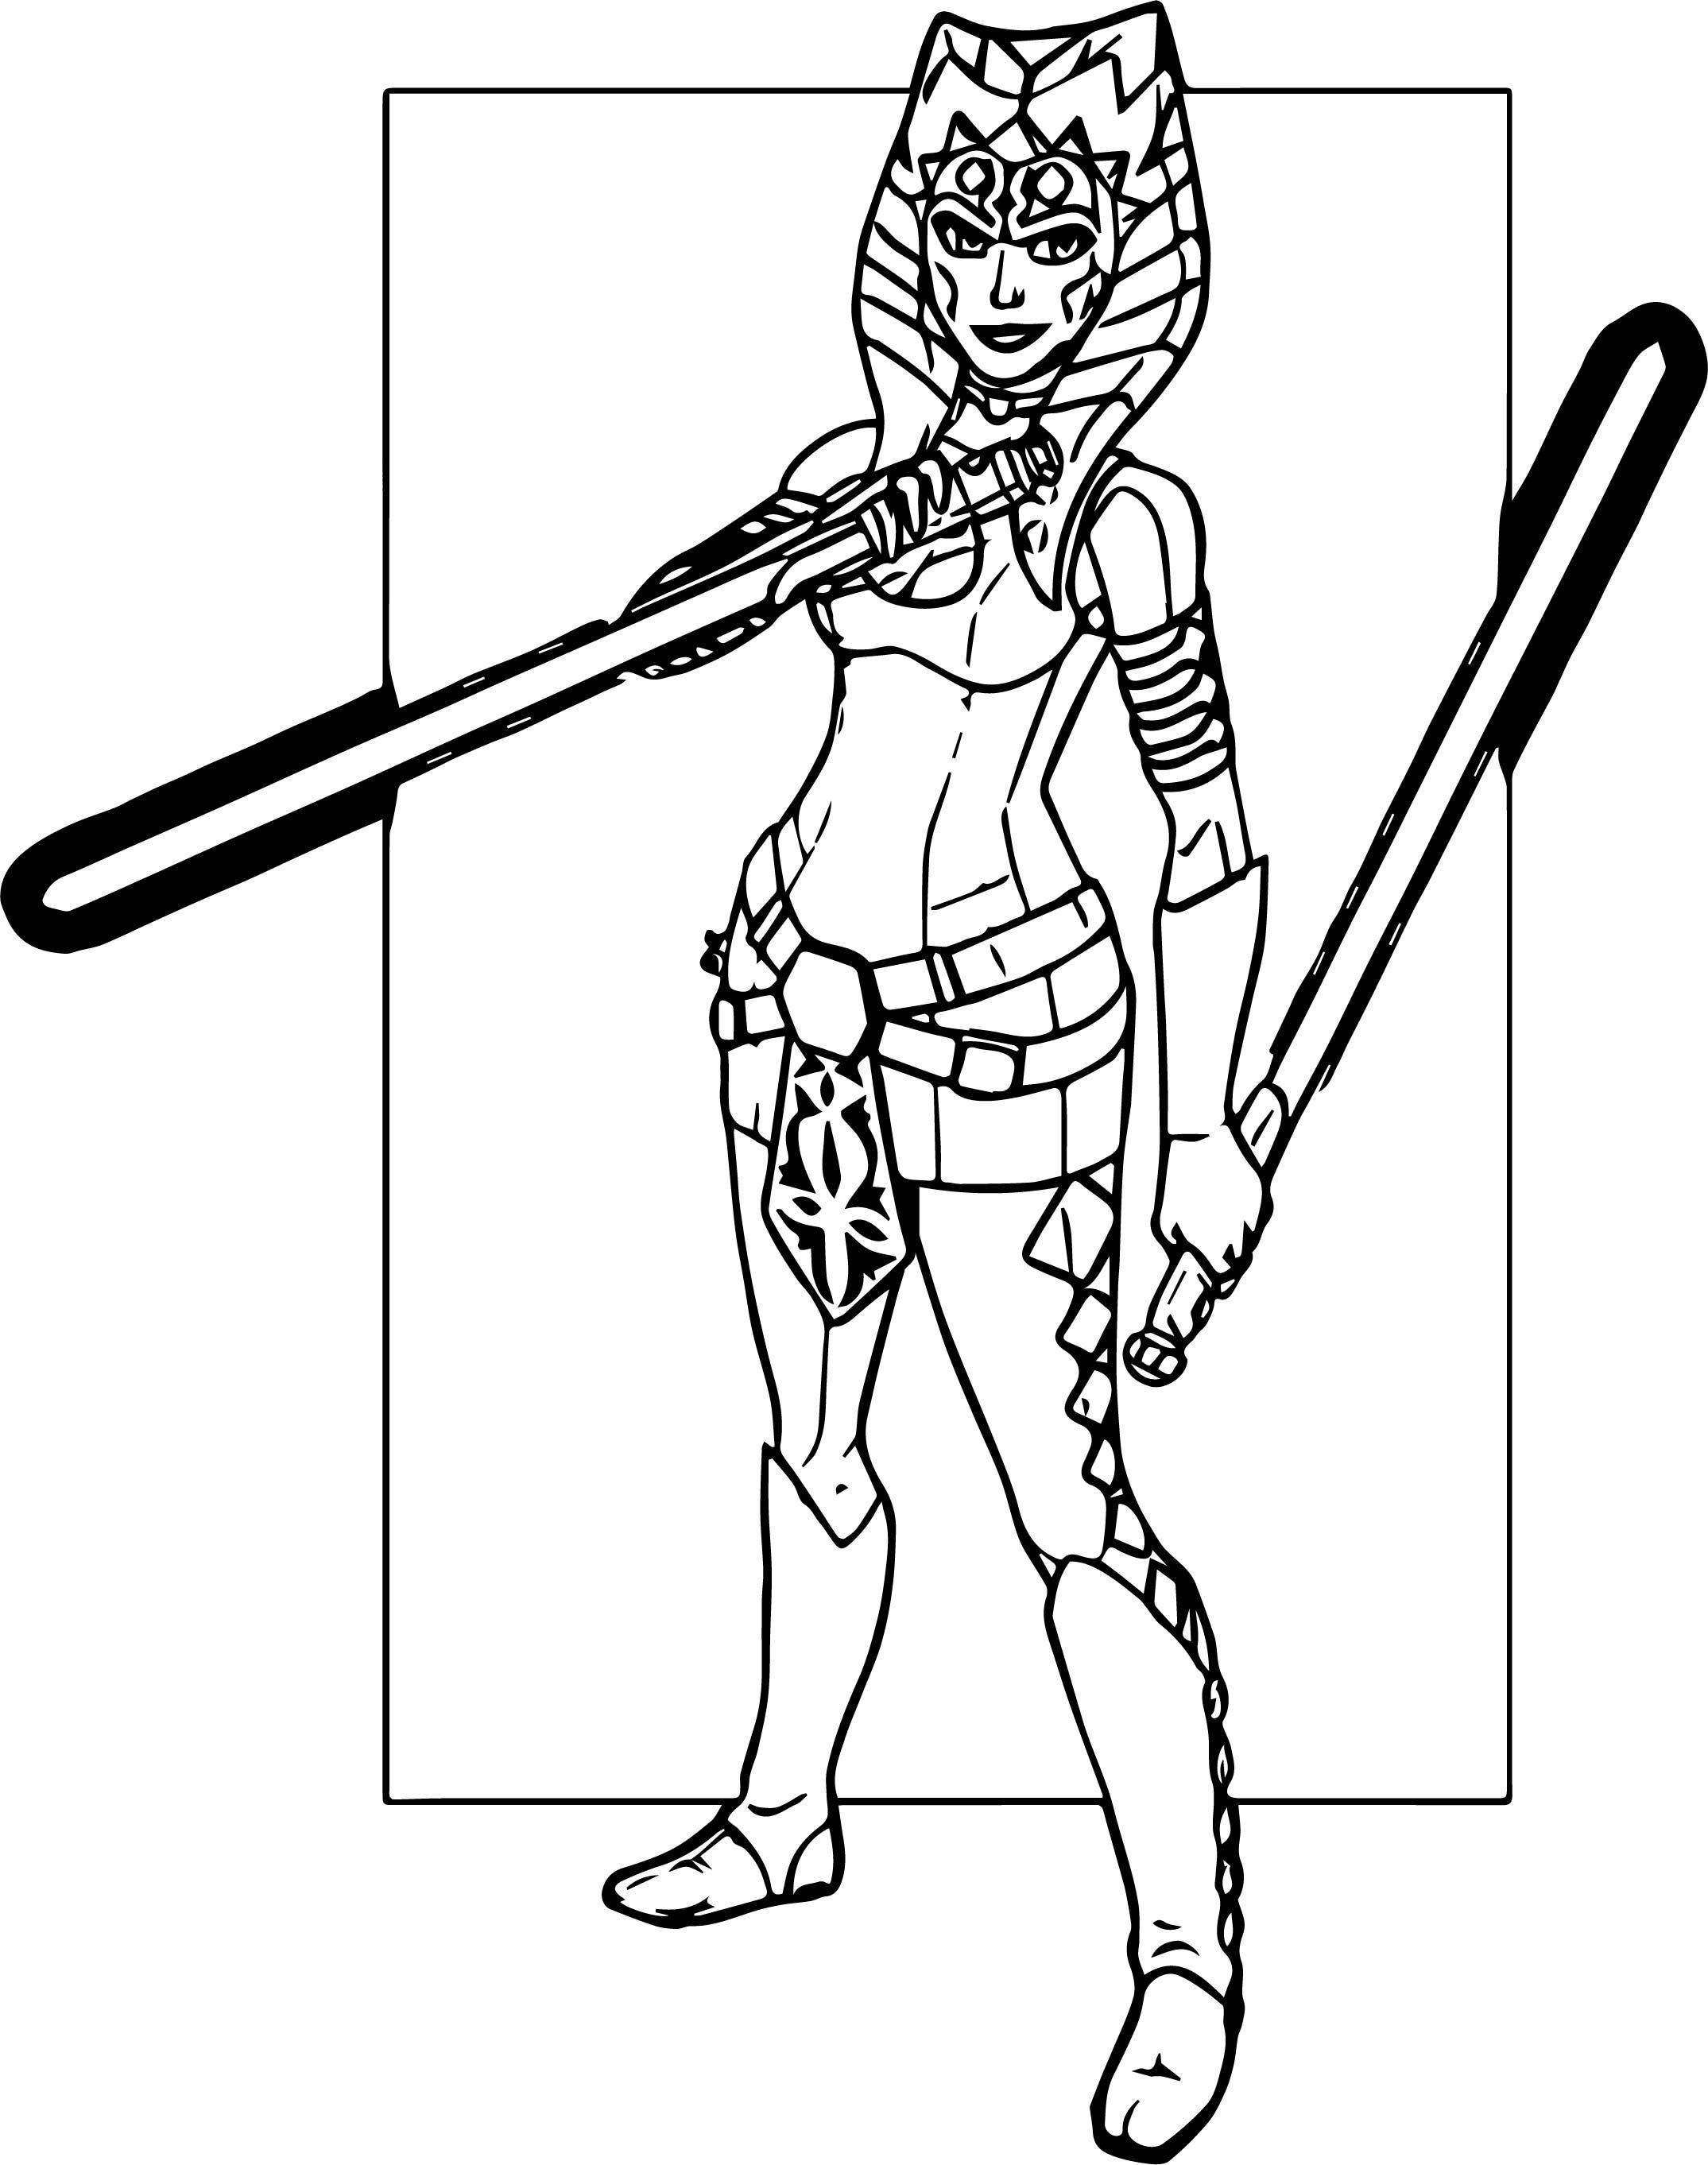 blade coloring pages Free http://www.wallpaperartdesignhd.us/blade-coloring- pages-free/46341 | Coloring pages, Ahsoka tano, Animal coloring pages